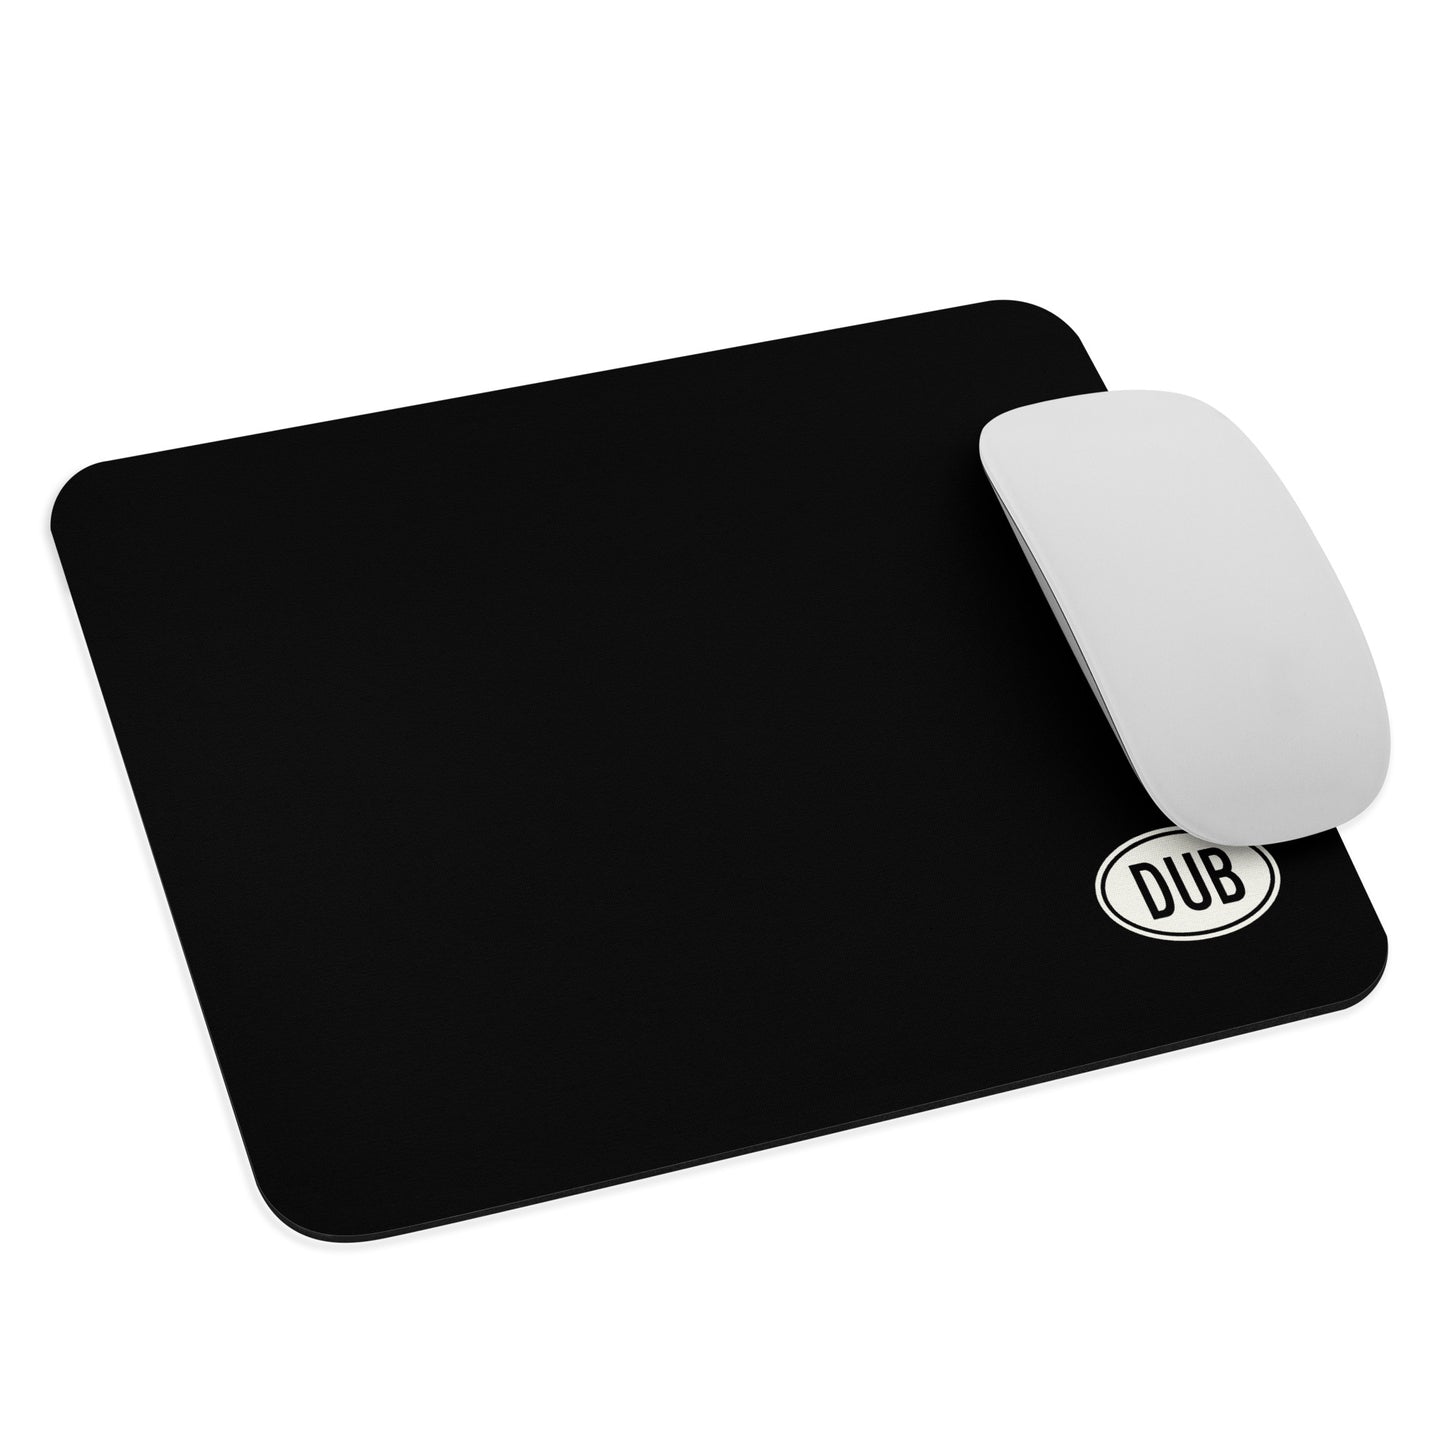 Unique Travel Gift Mouse Pad - White Oval • DUB Dublin • YHM Designs - Image 03